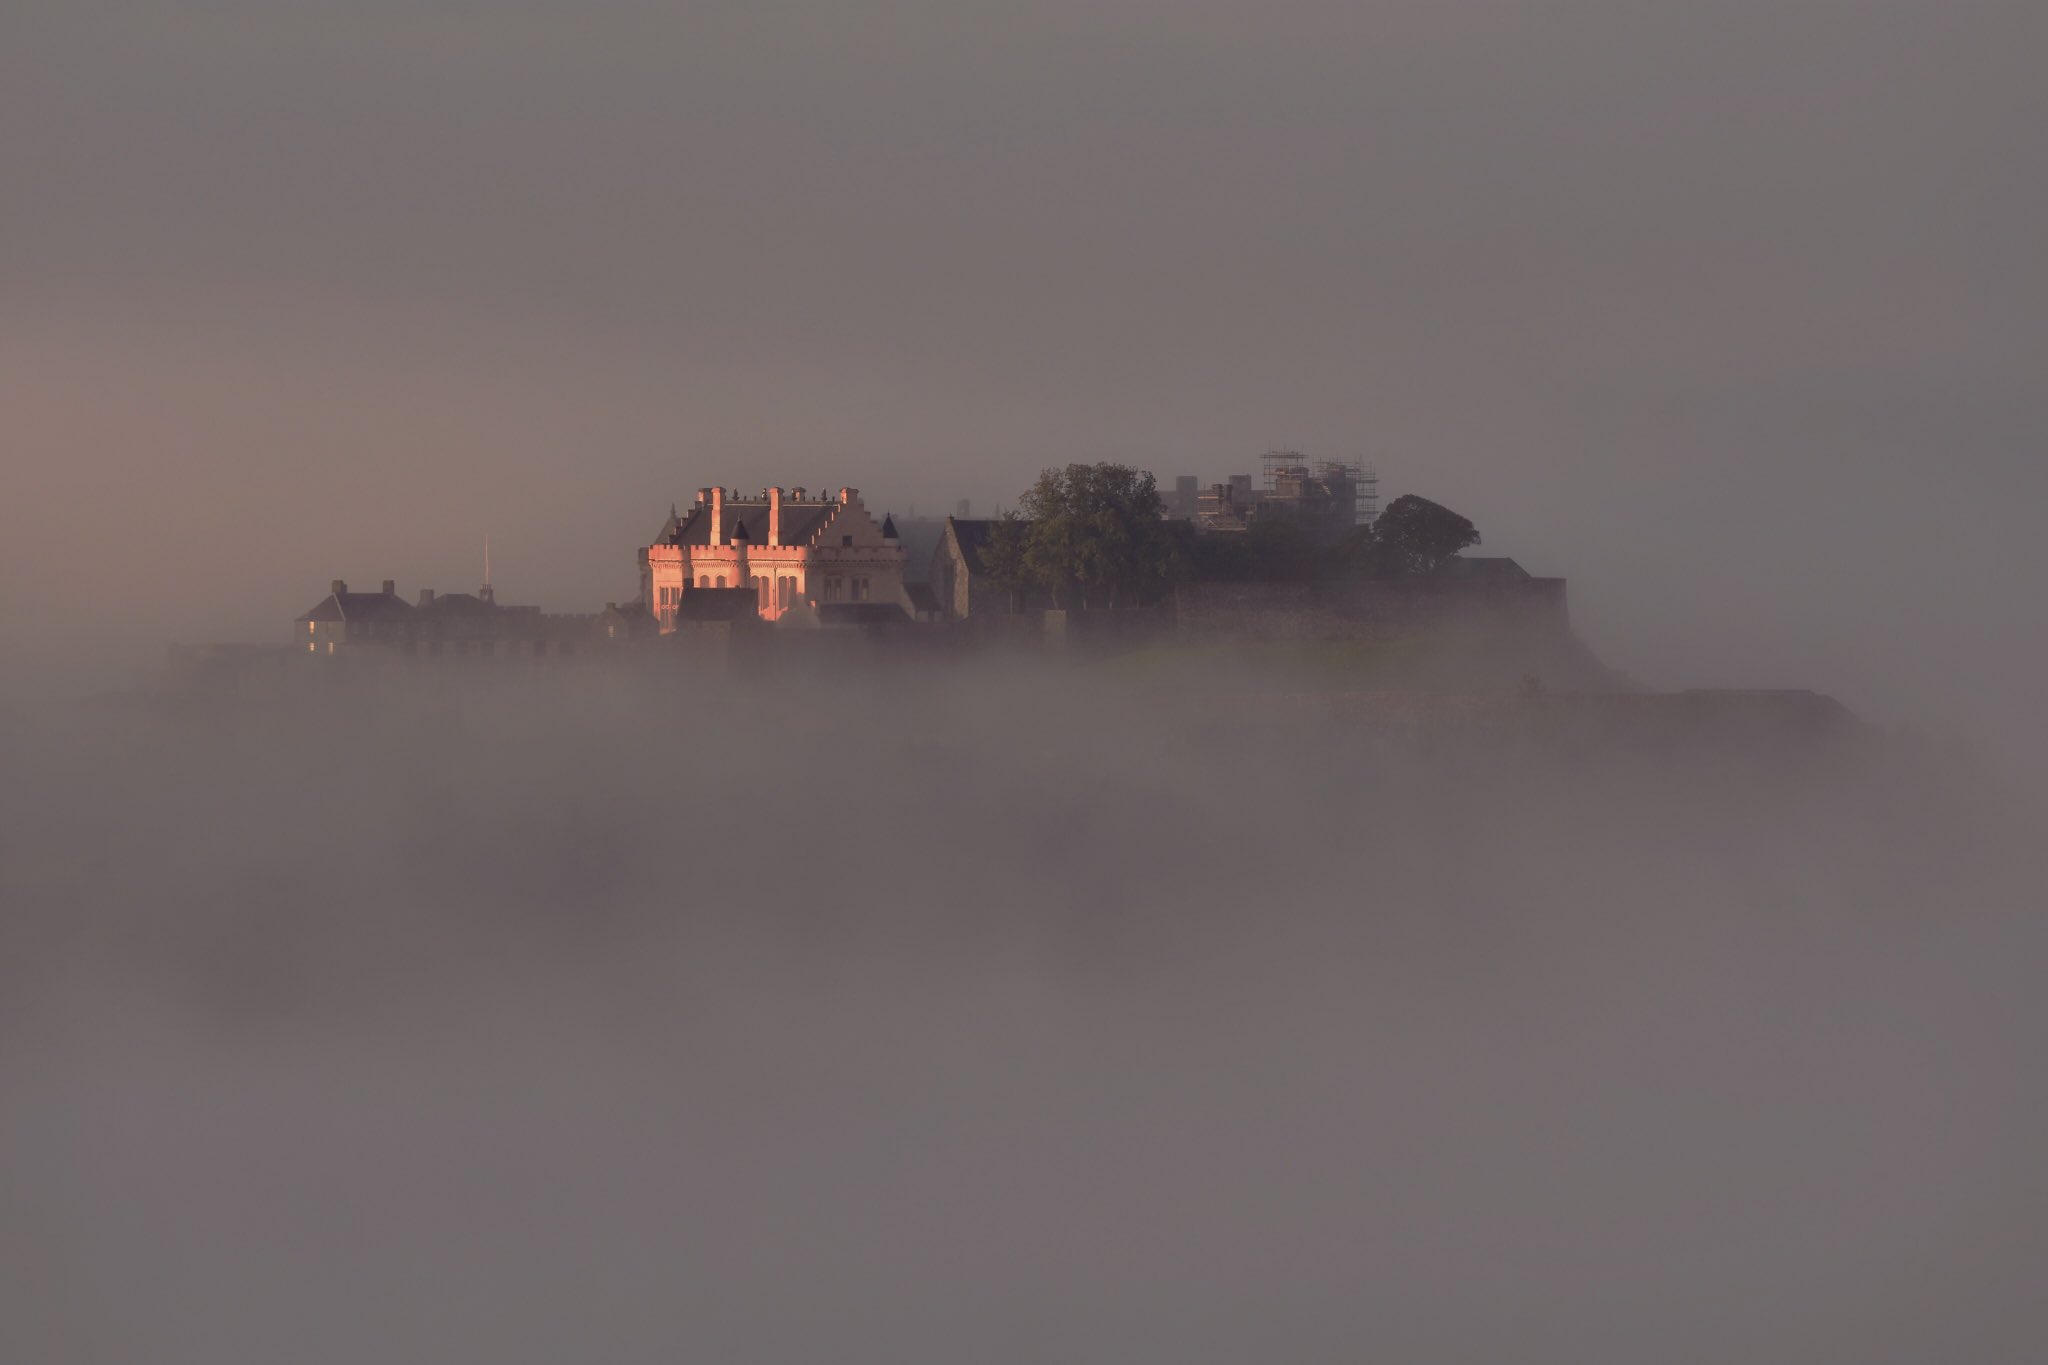 2nd Place Stirling Castle rising up through the morning mist by Charles McGuigan @CharlesMcGuiga2